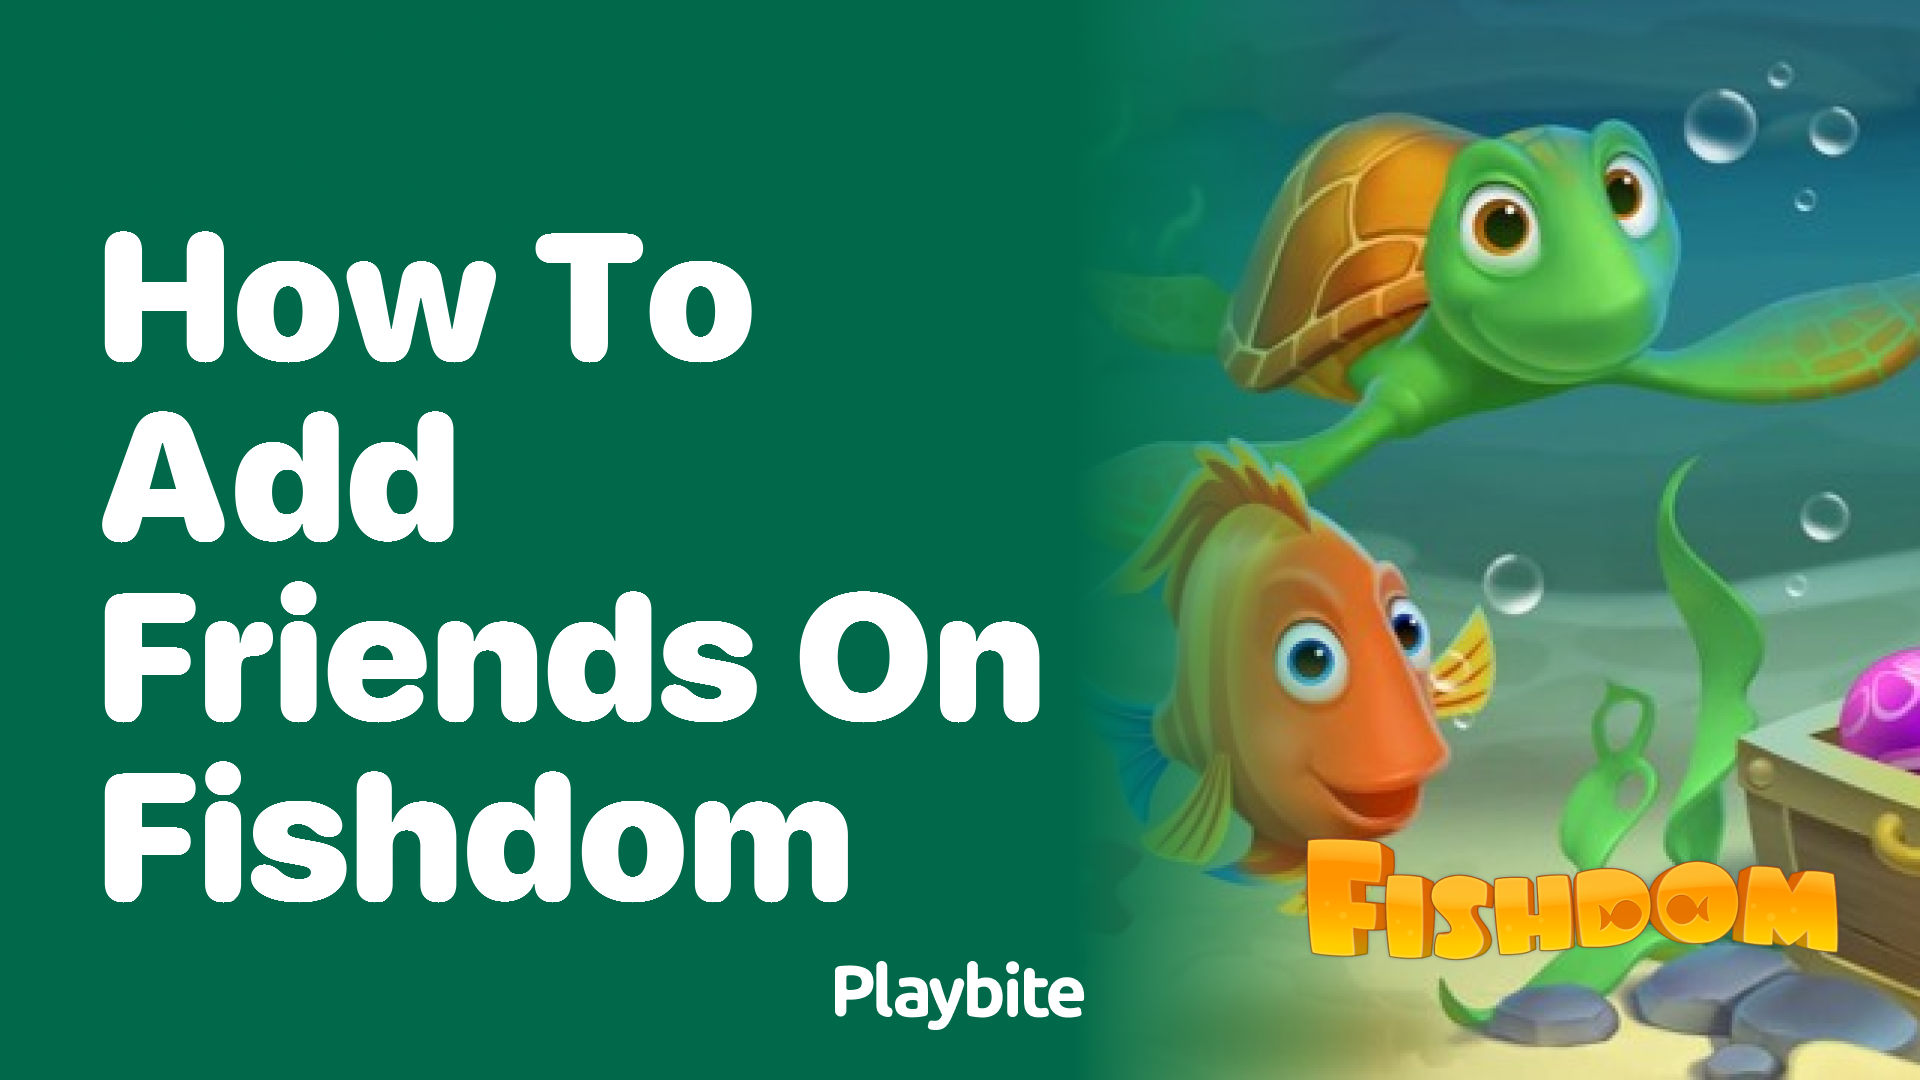 How to Add Friends on Fishdom: A Simple Guide